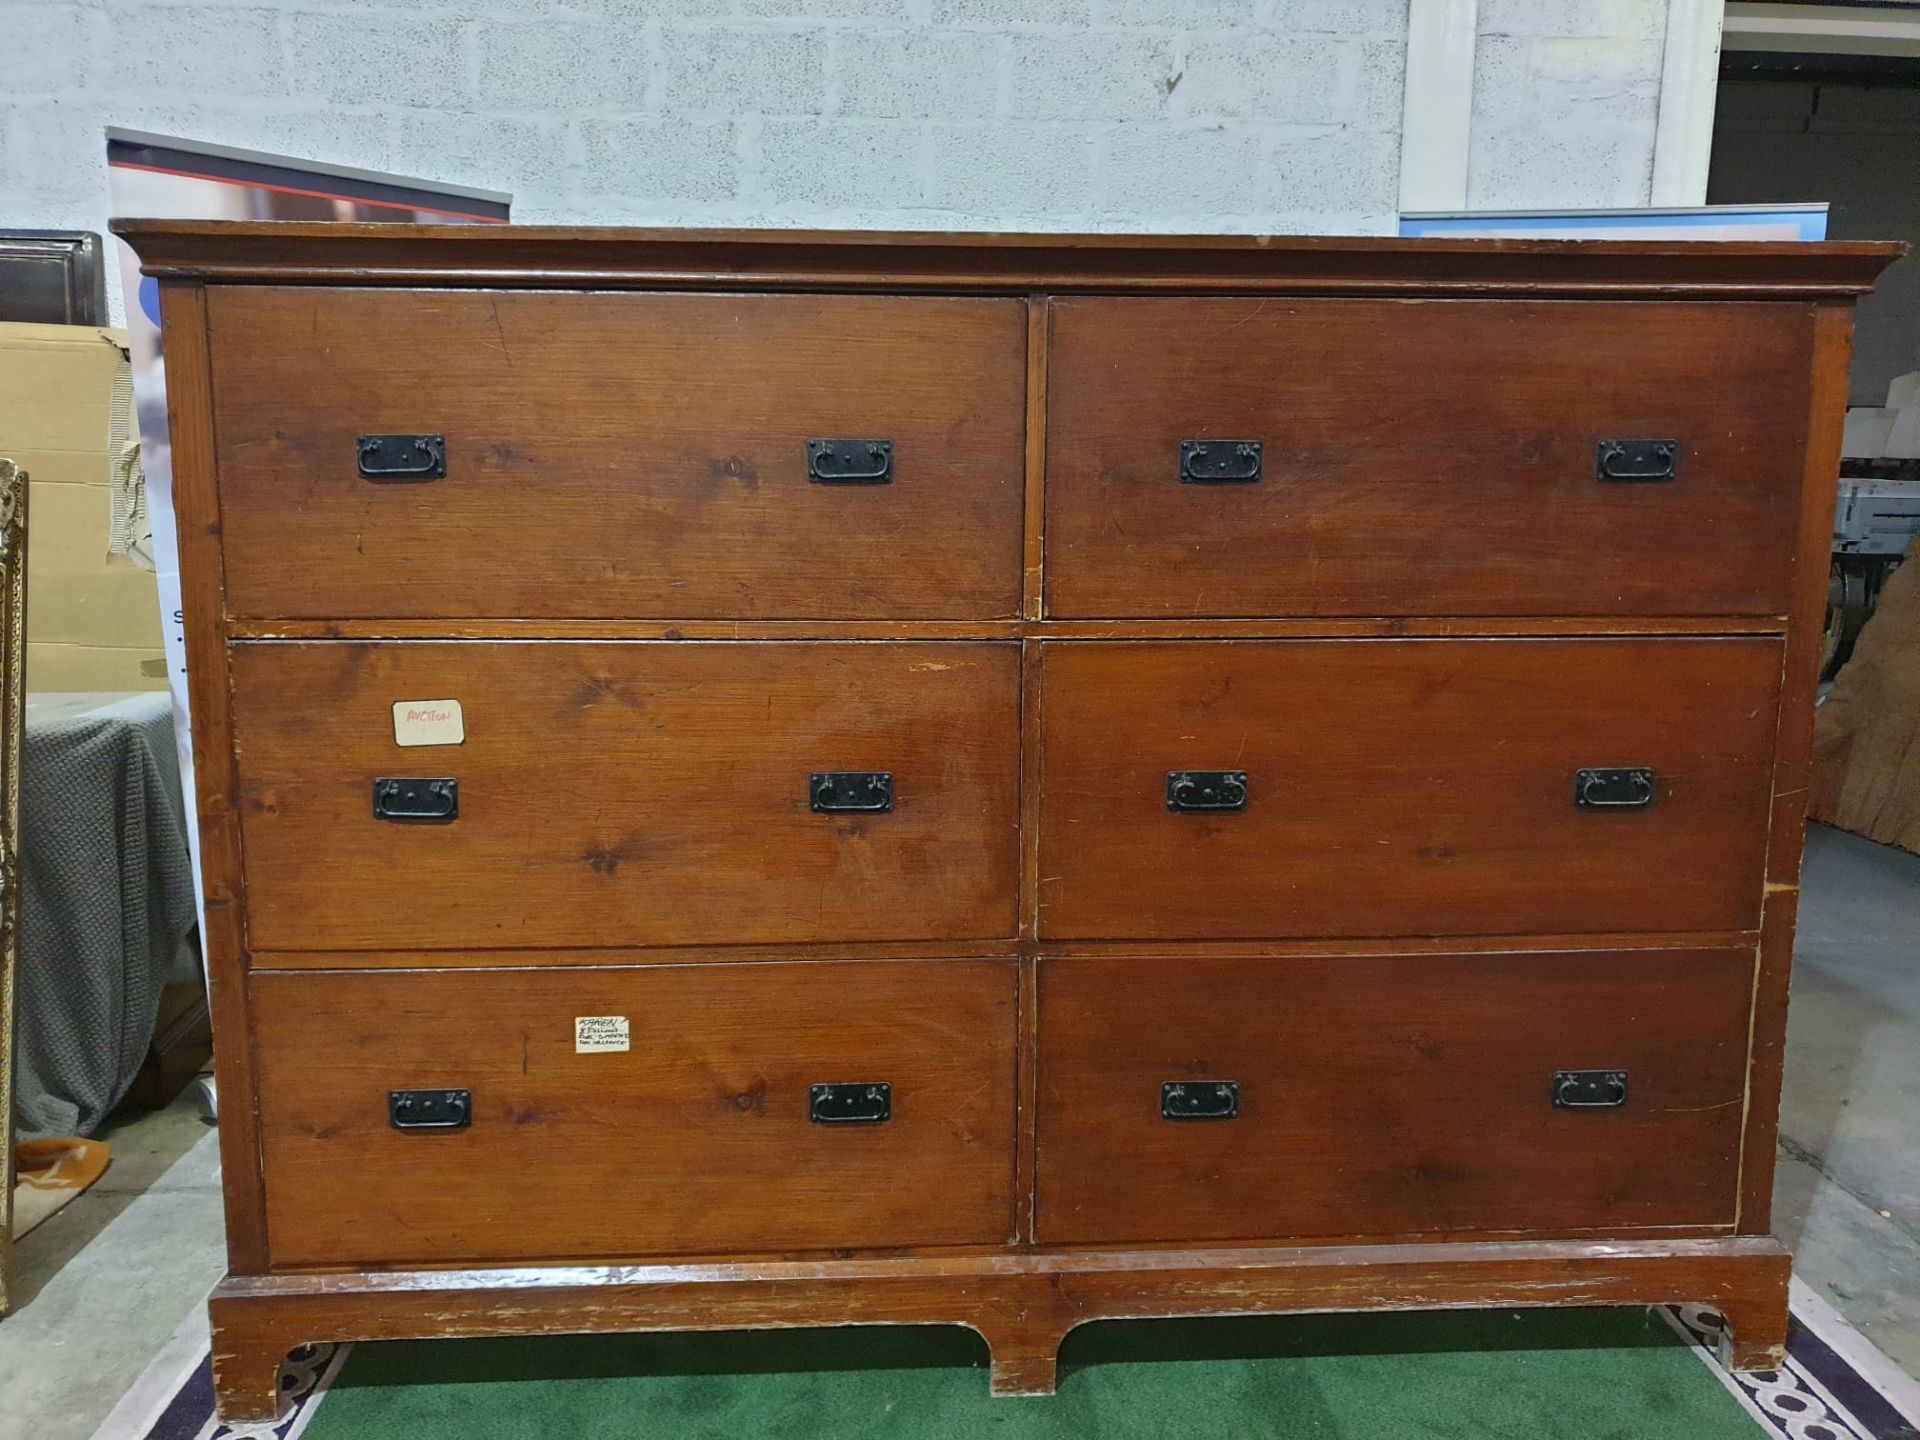 A large late Victorian stained pine chest of drawers. With two banks of three deep drawers, each